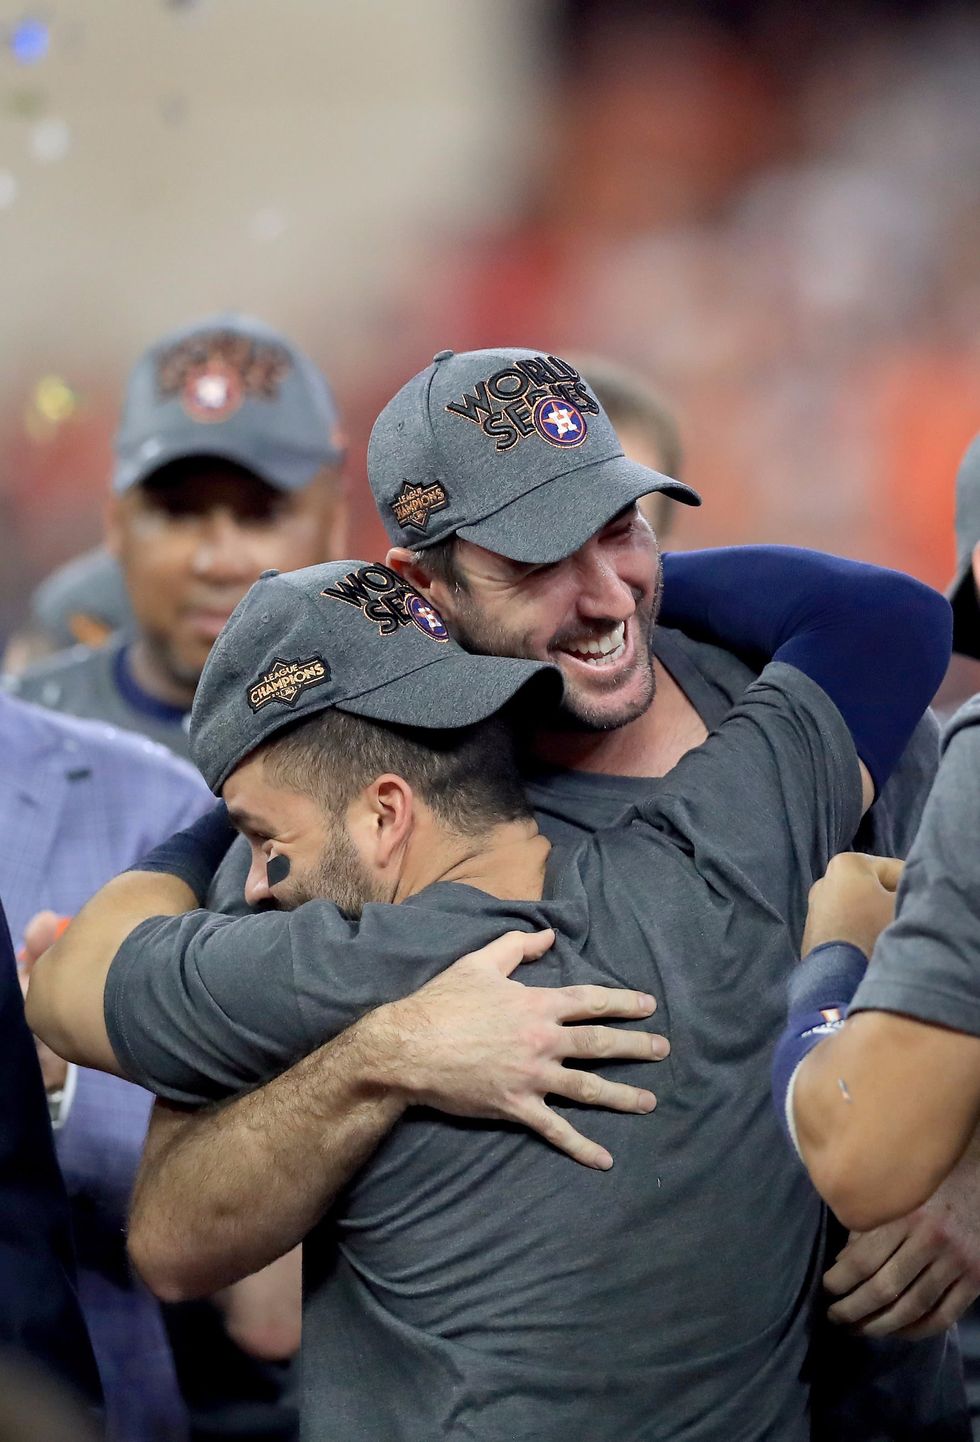 MLB insider shares insight on Baker's future with Astros - SportsMap